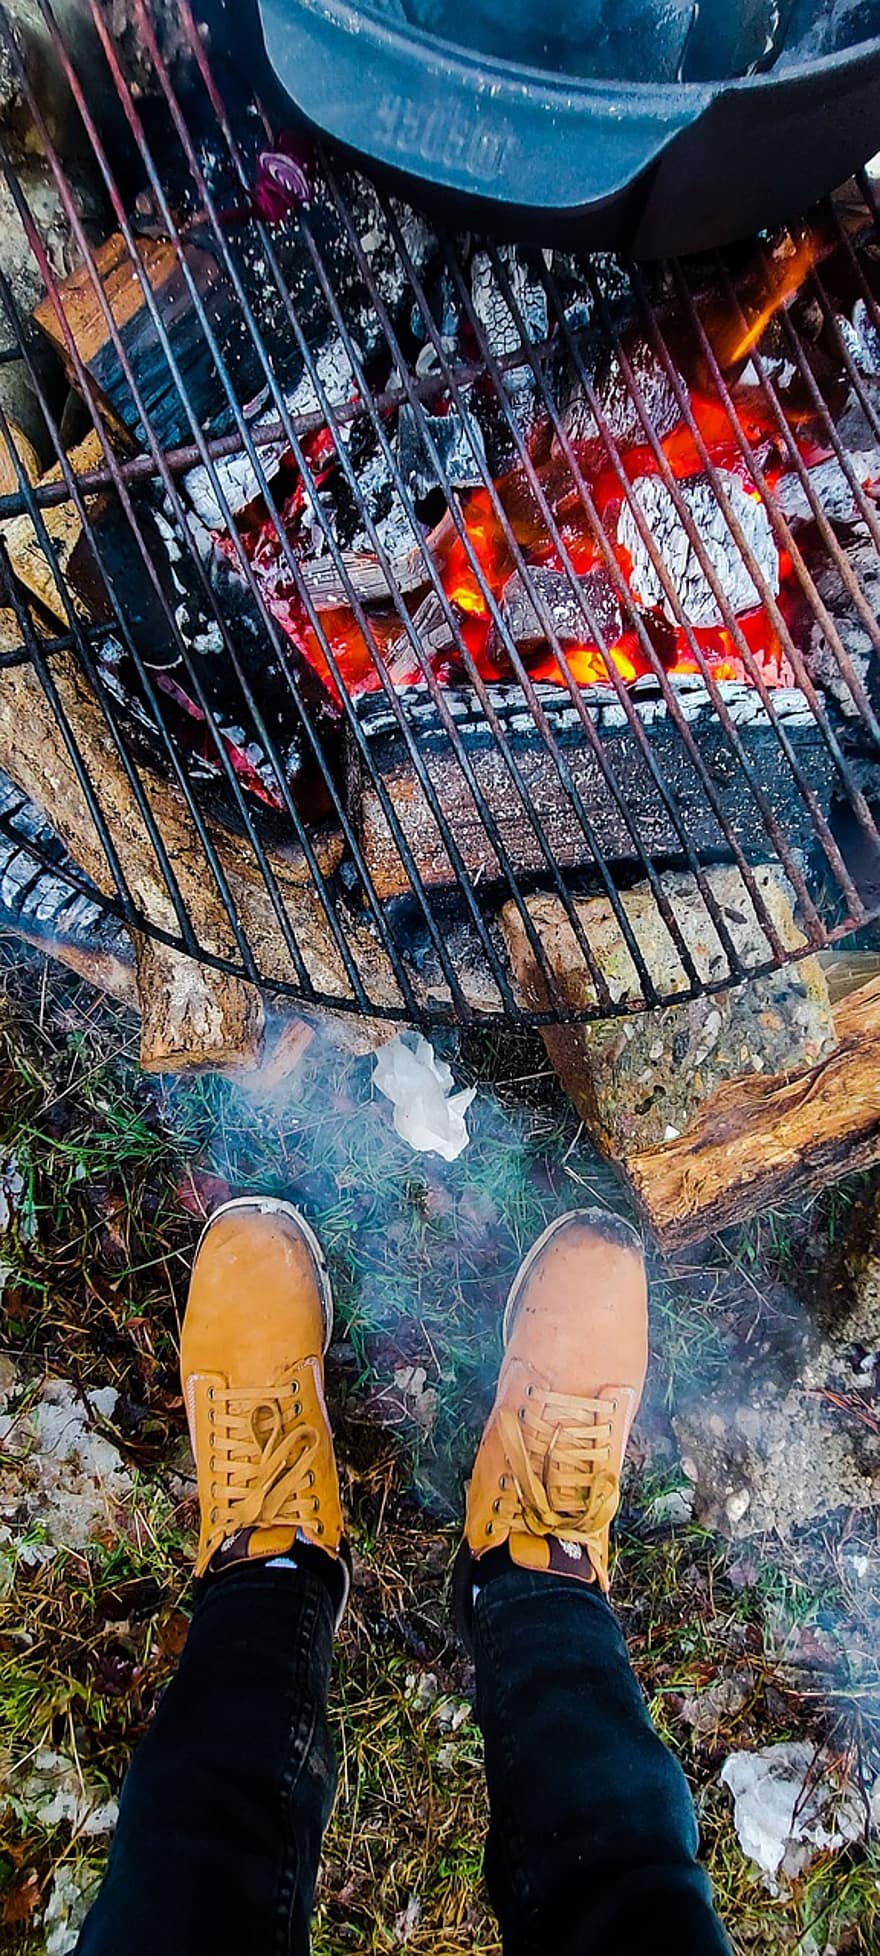 Fire, Coal, Boots, Timberlands, Wood, Firewood, Barbecue, Grill, Grilling, Shoes, Footwear